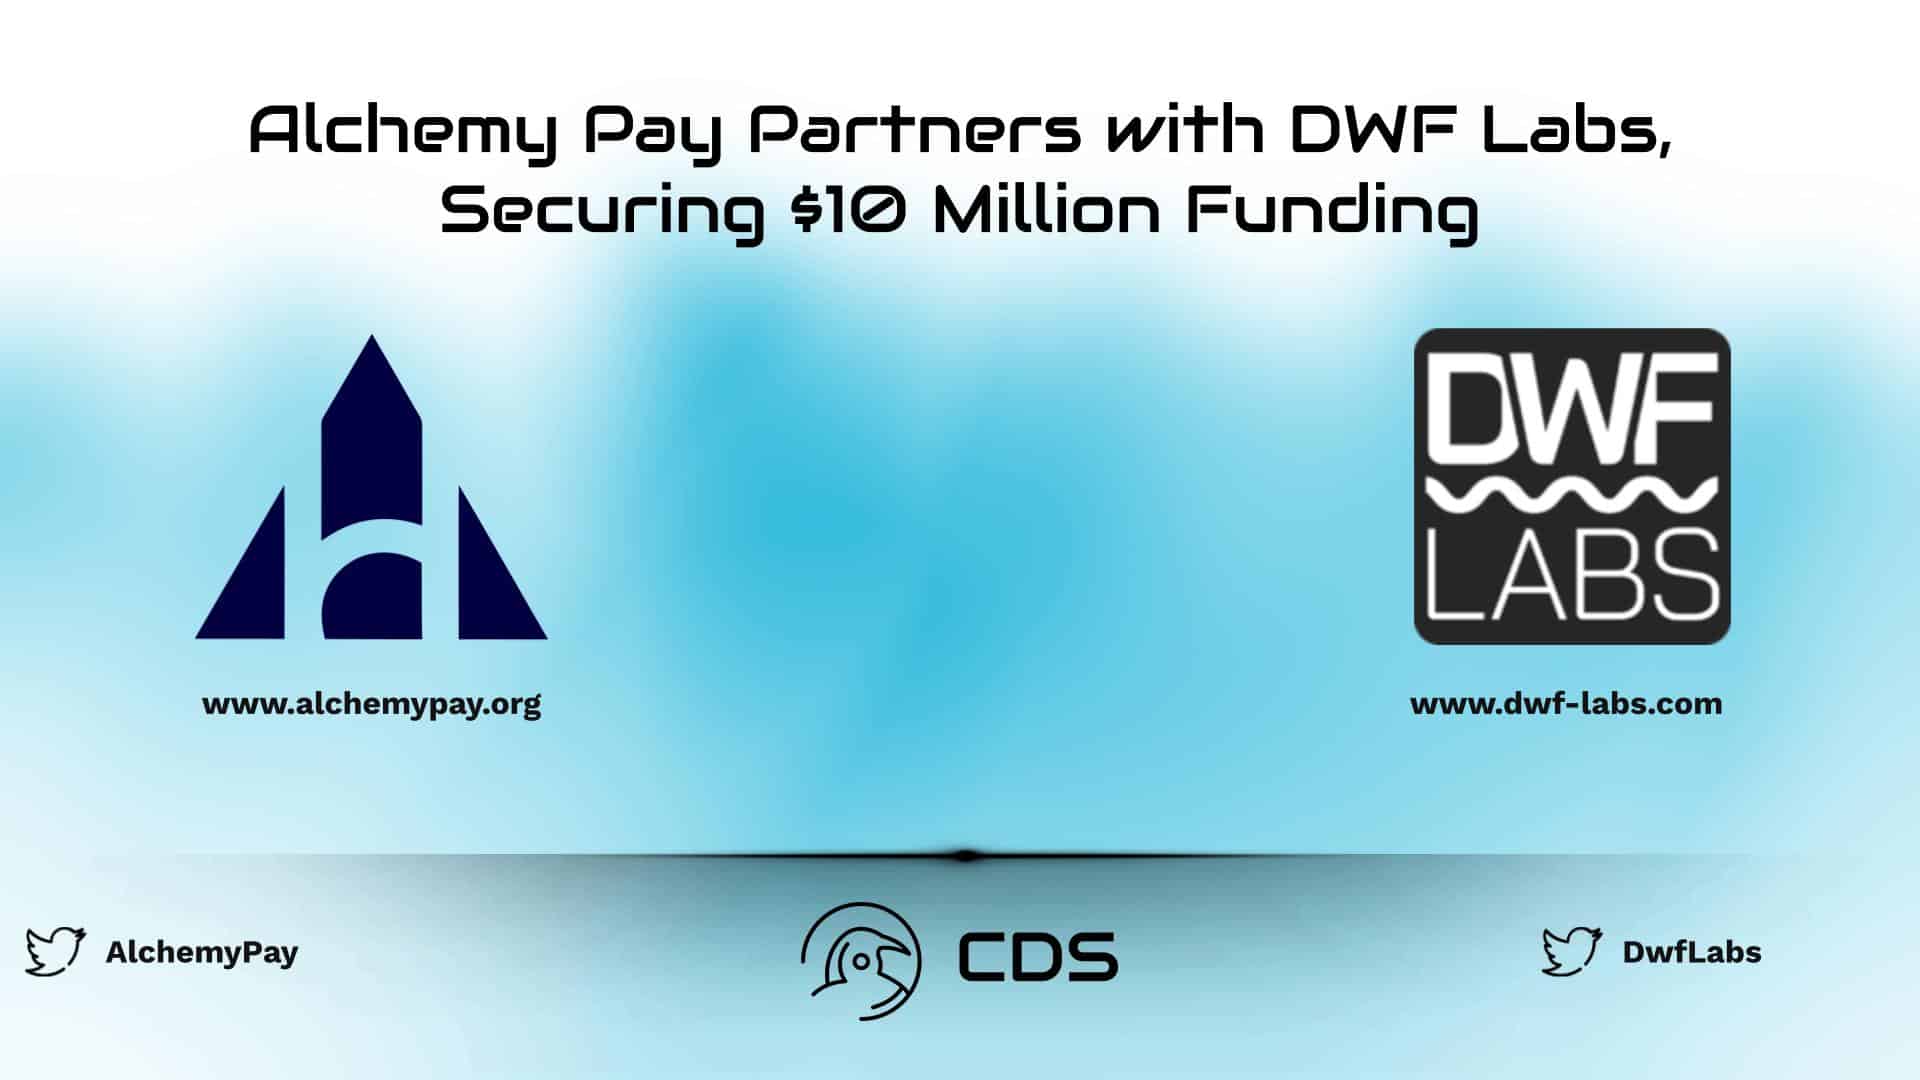 Alchemy Pay Partners with DWF Labs, Securing $10 Million Funding